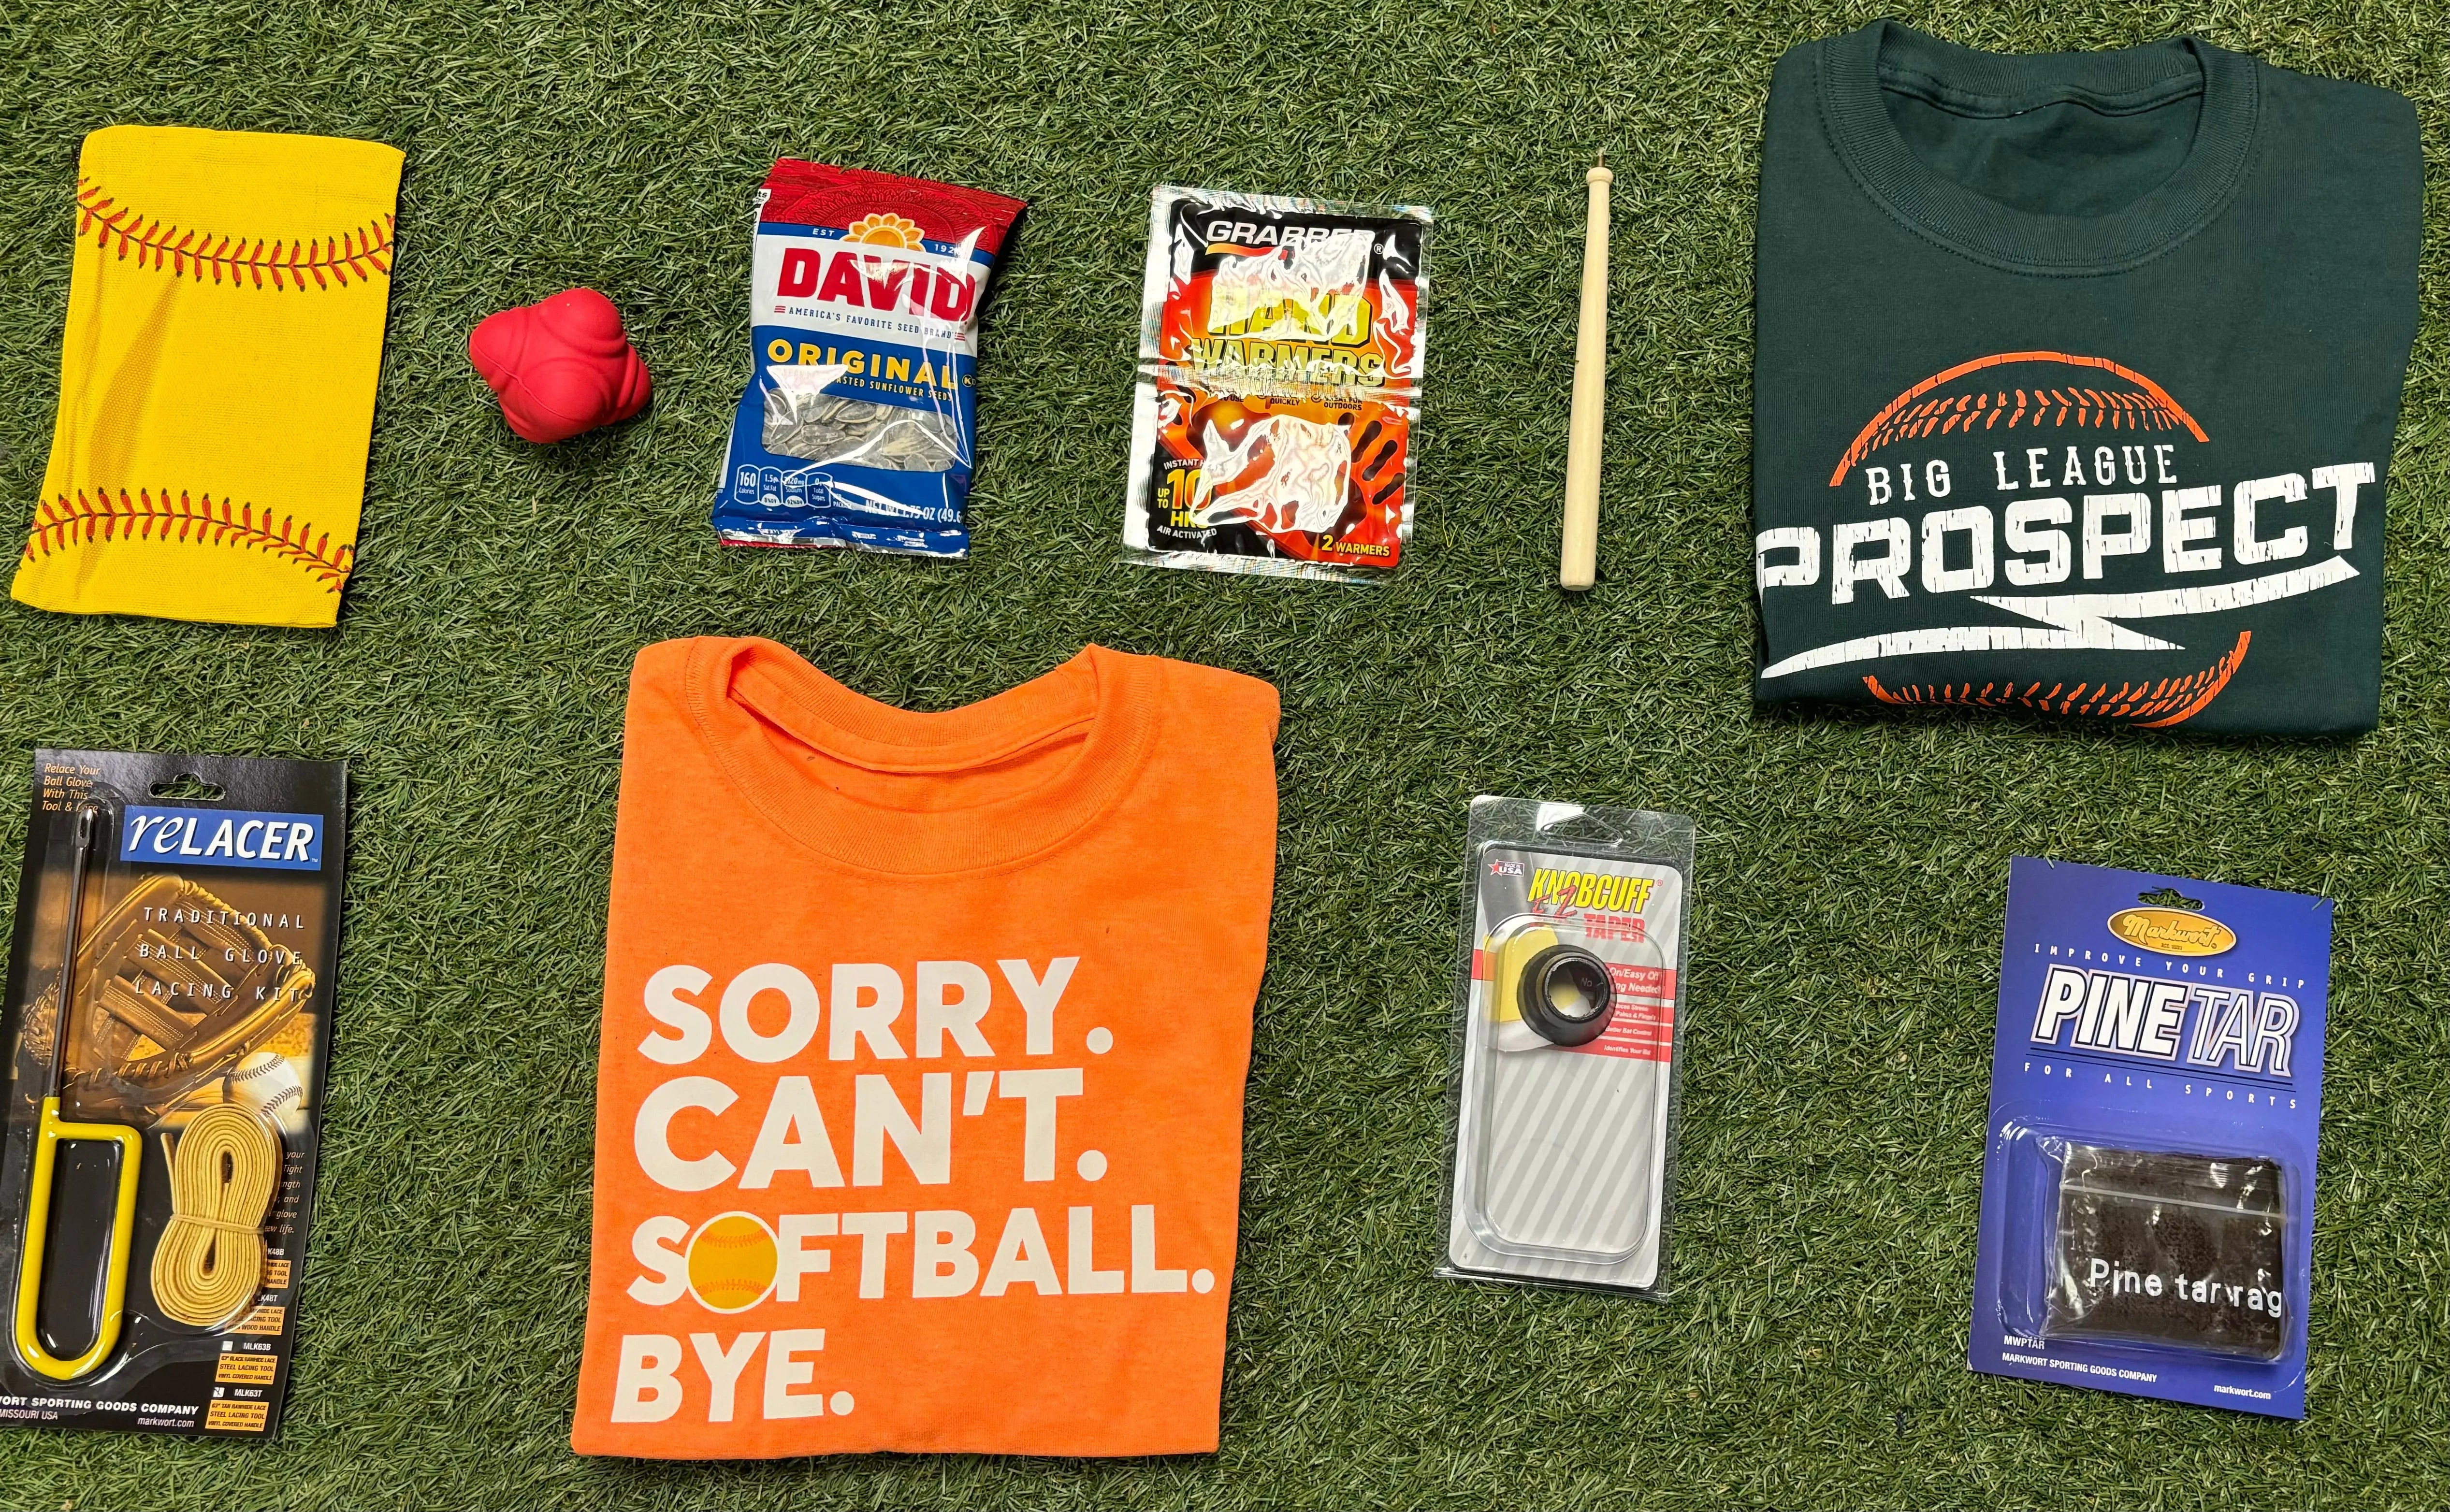 Inside the Batter's Box Monthly Subscription